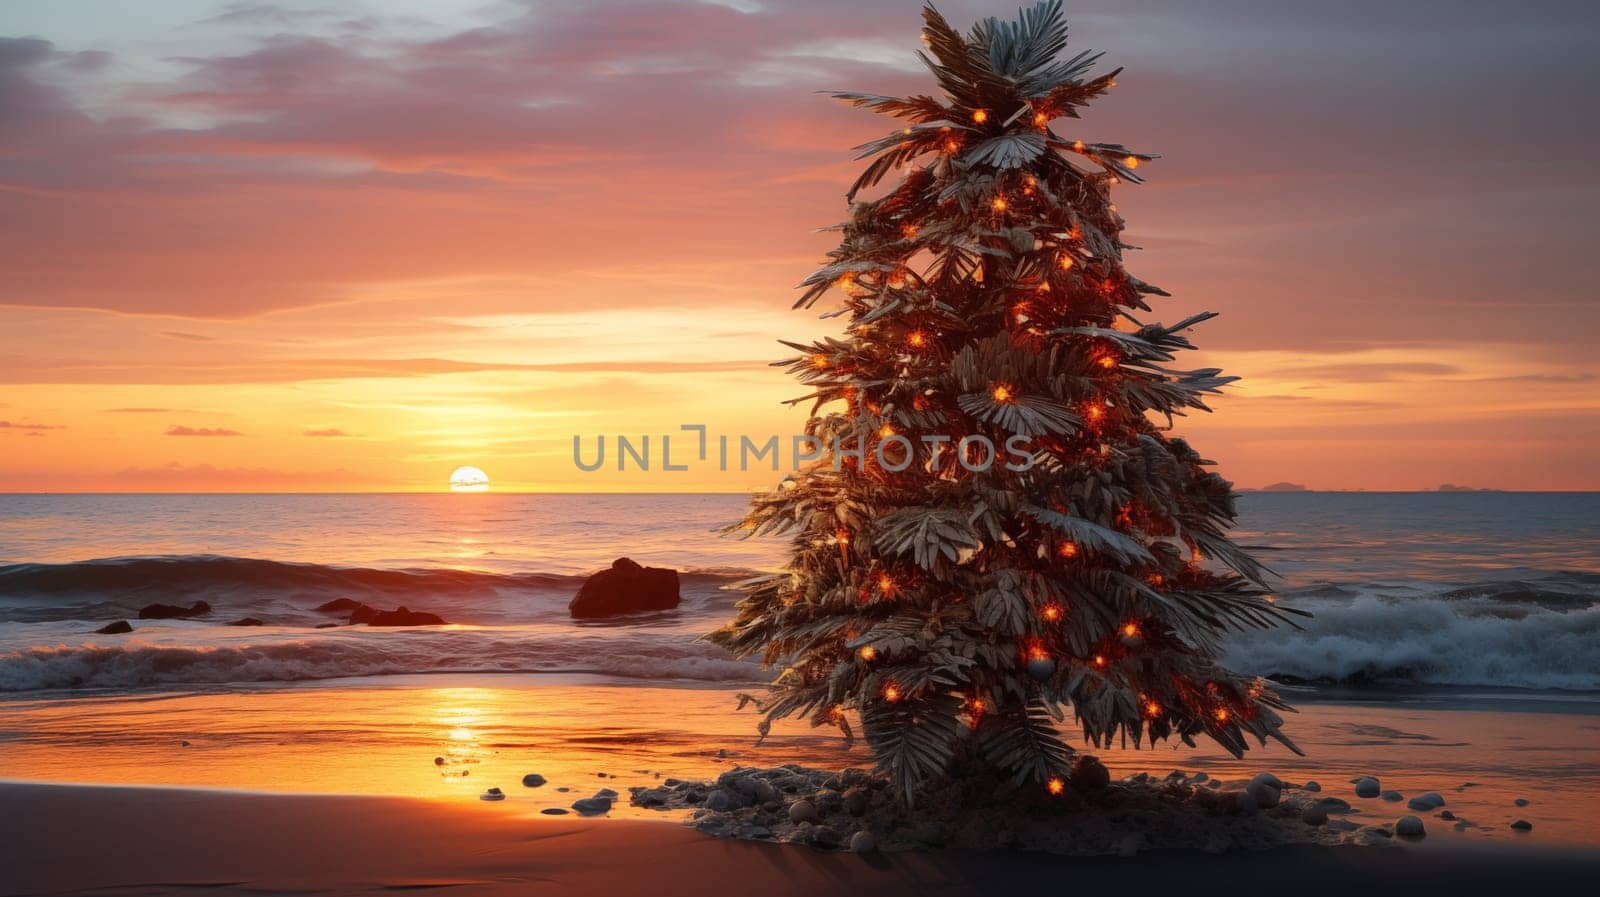 Christmas tree made of palm leaves on the beach at sunset with waves and bright sky.